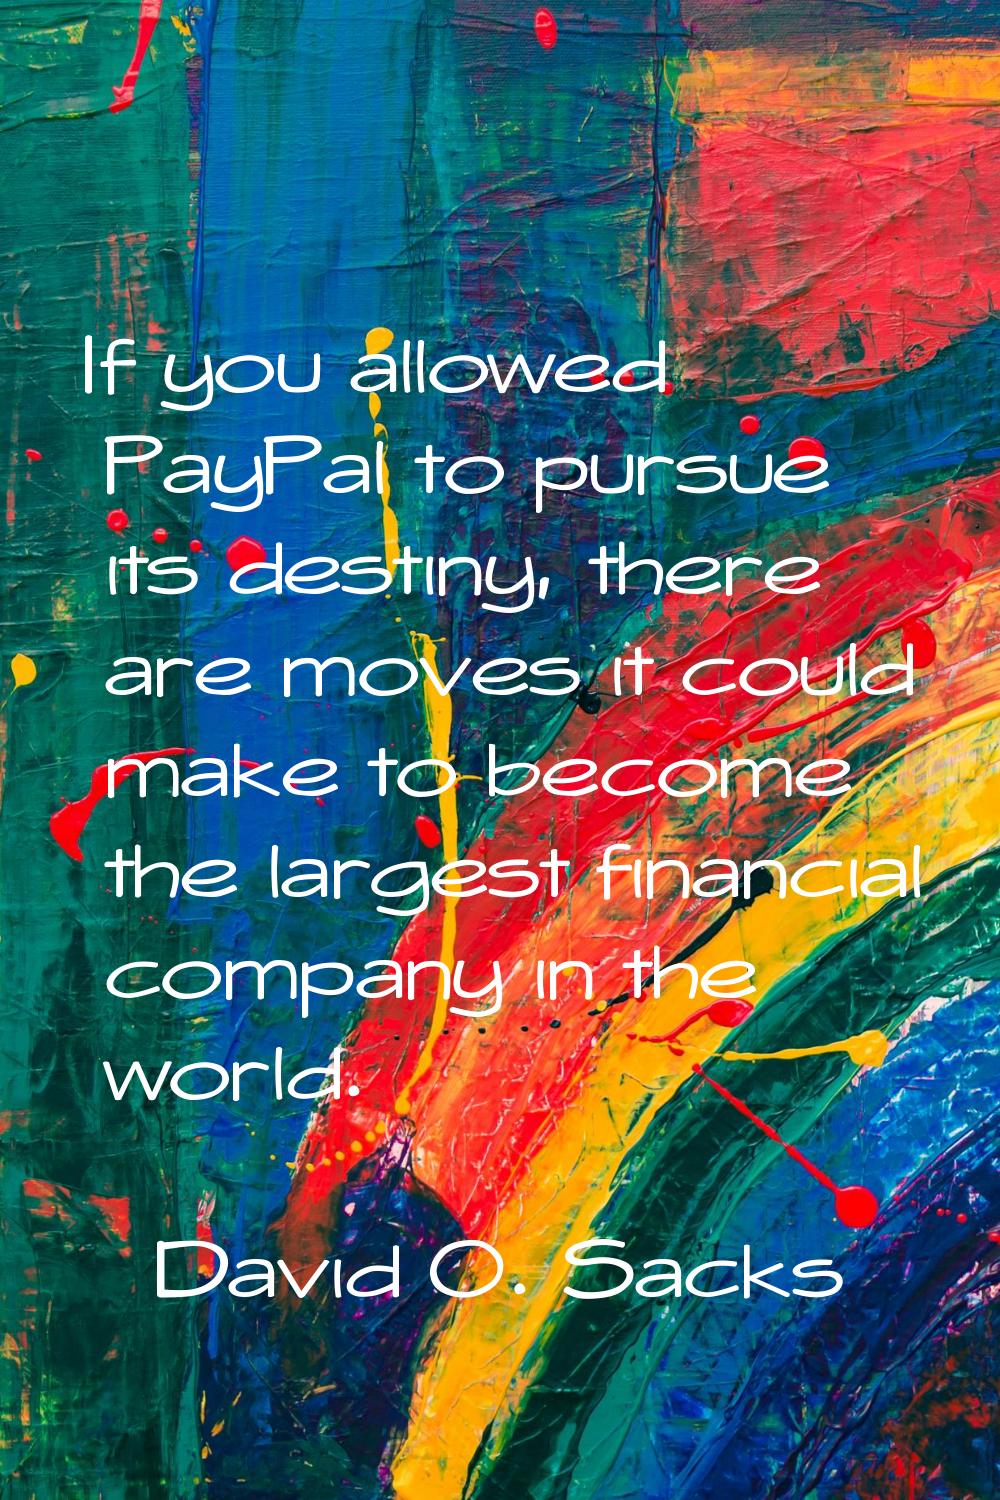 If you allowed PayPal to pursue its destiny, there are moves it could make to become the largest fi